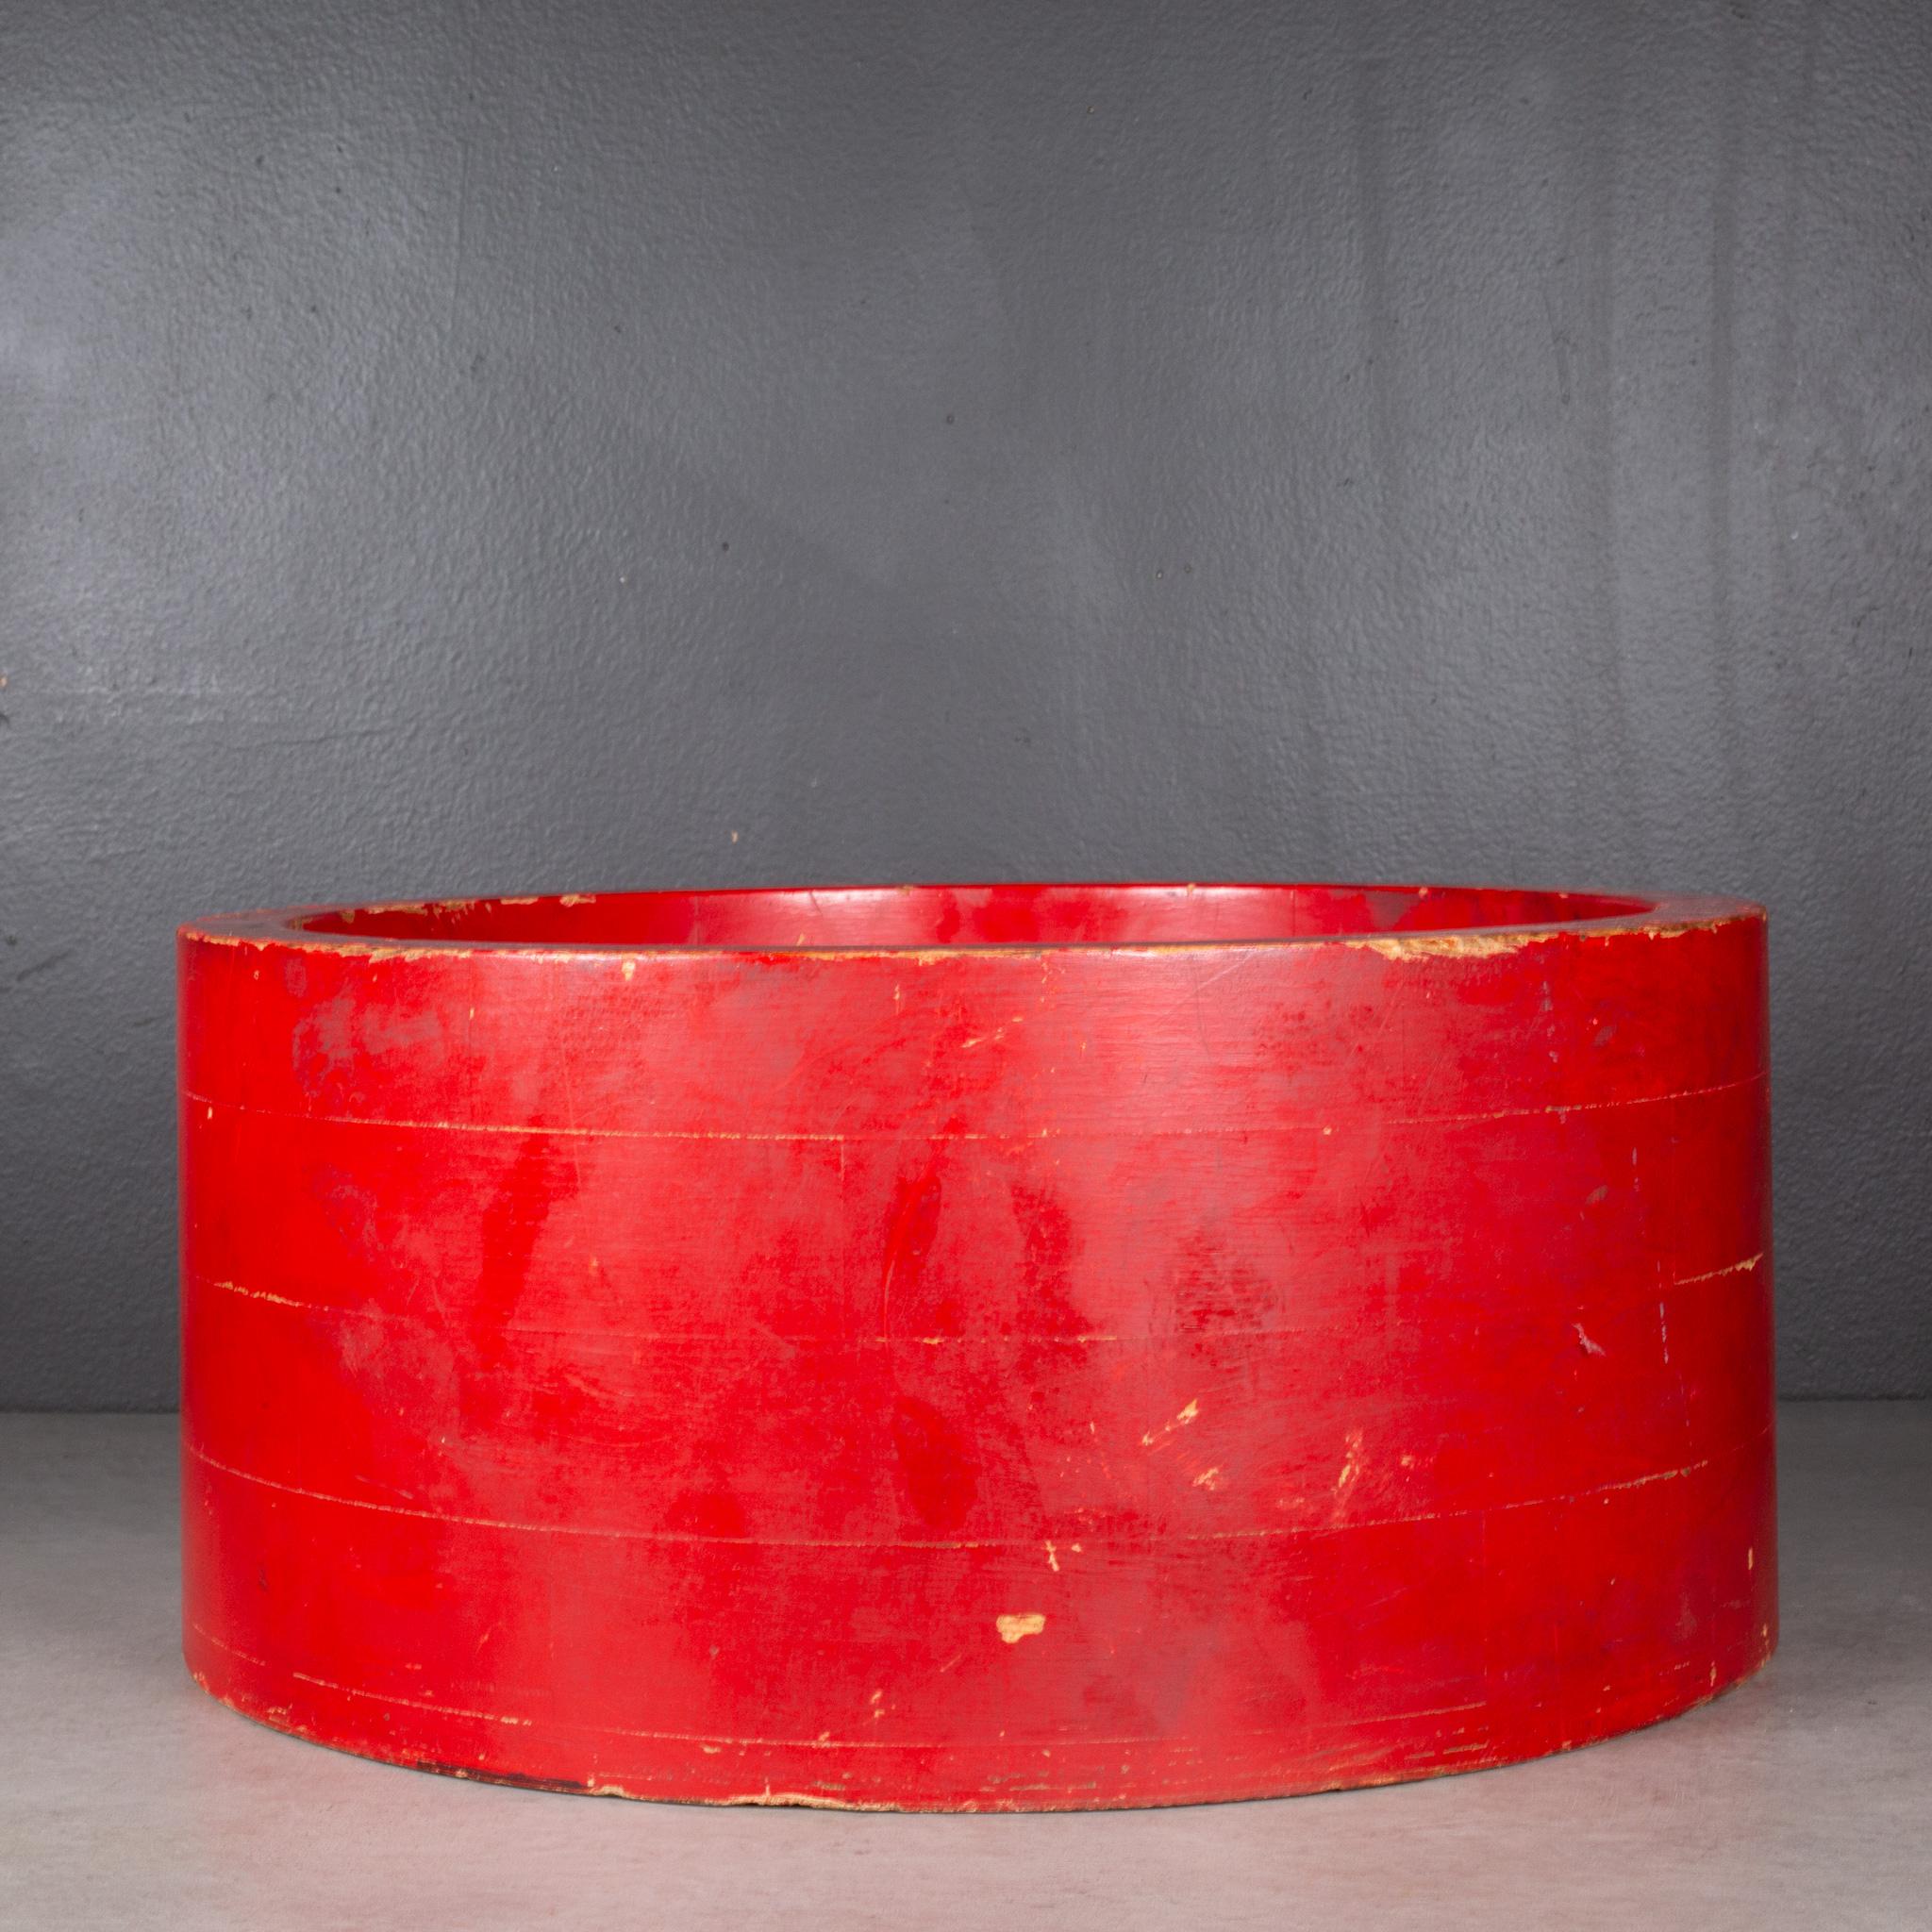 Metal Early 20th c. Red Wooden Foundry Mold c.1900  (FREE SHIPPING) For Sale